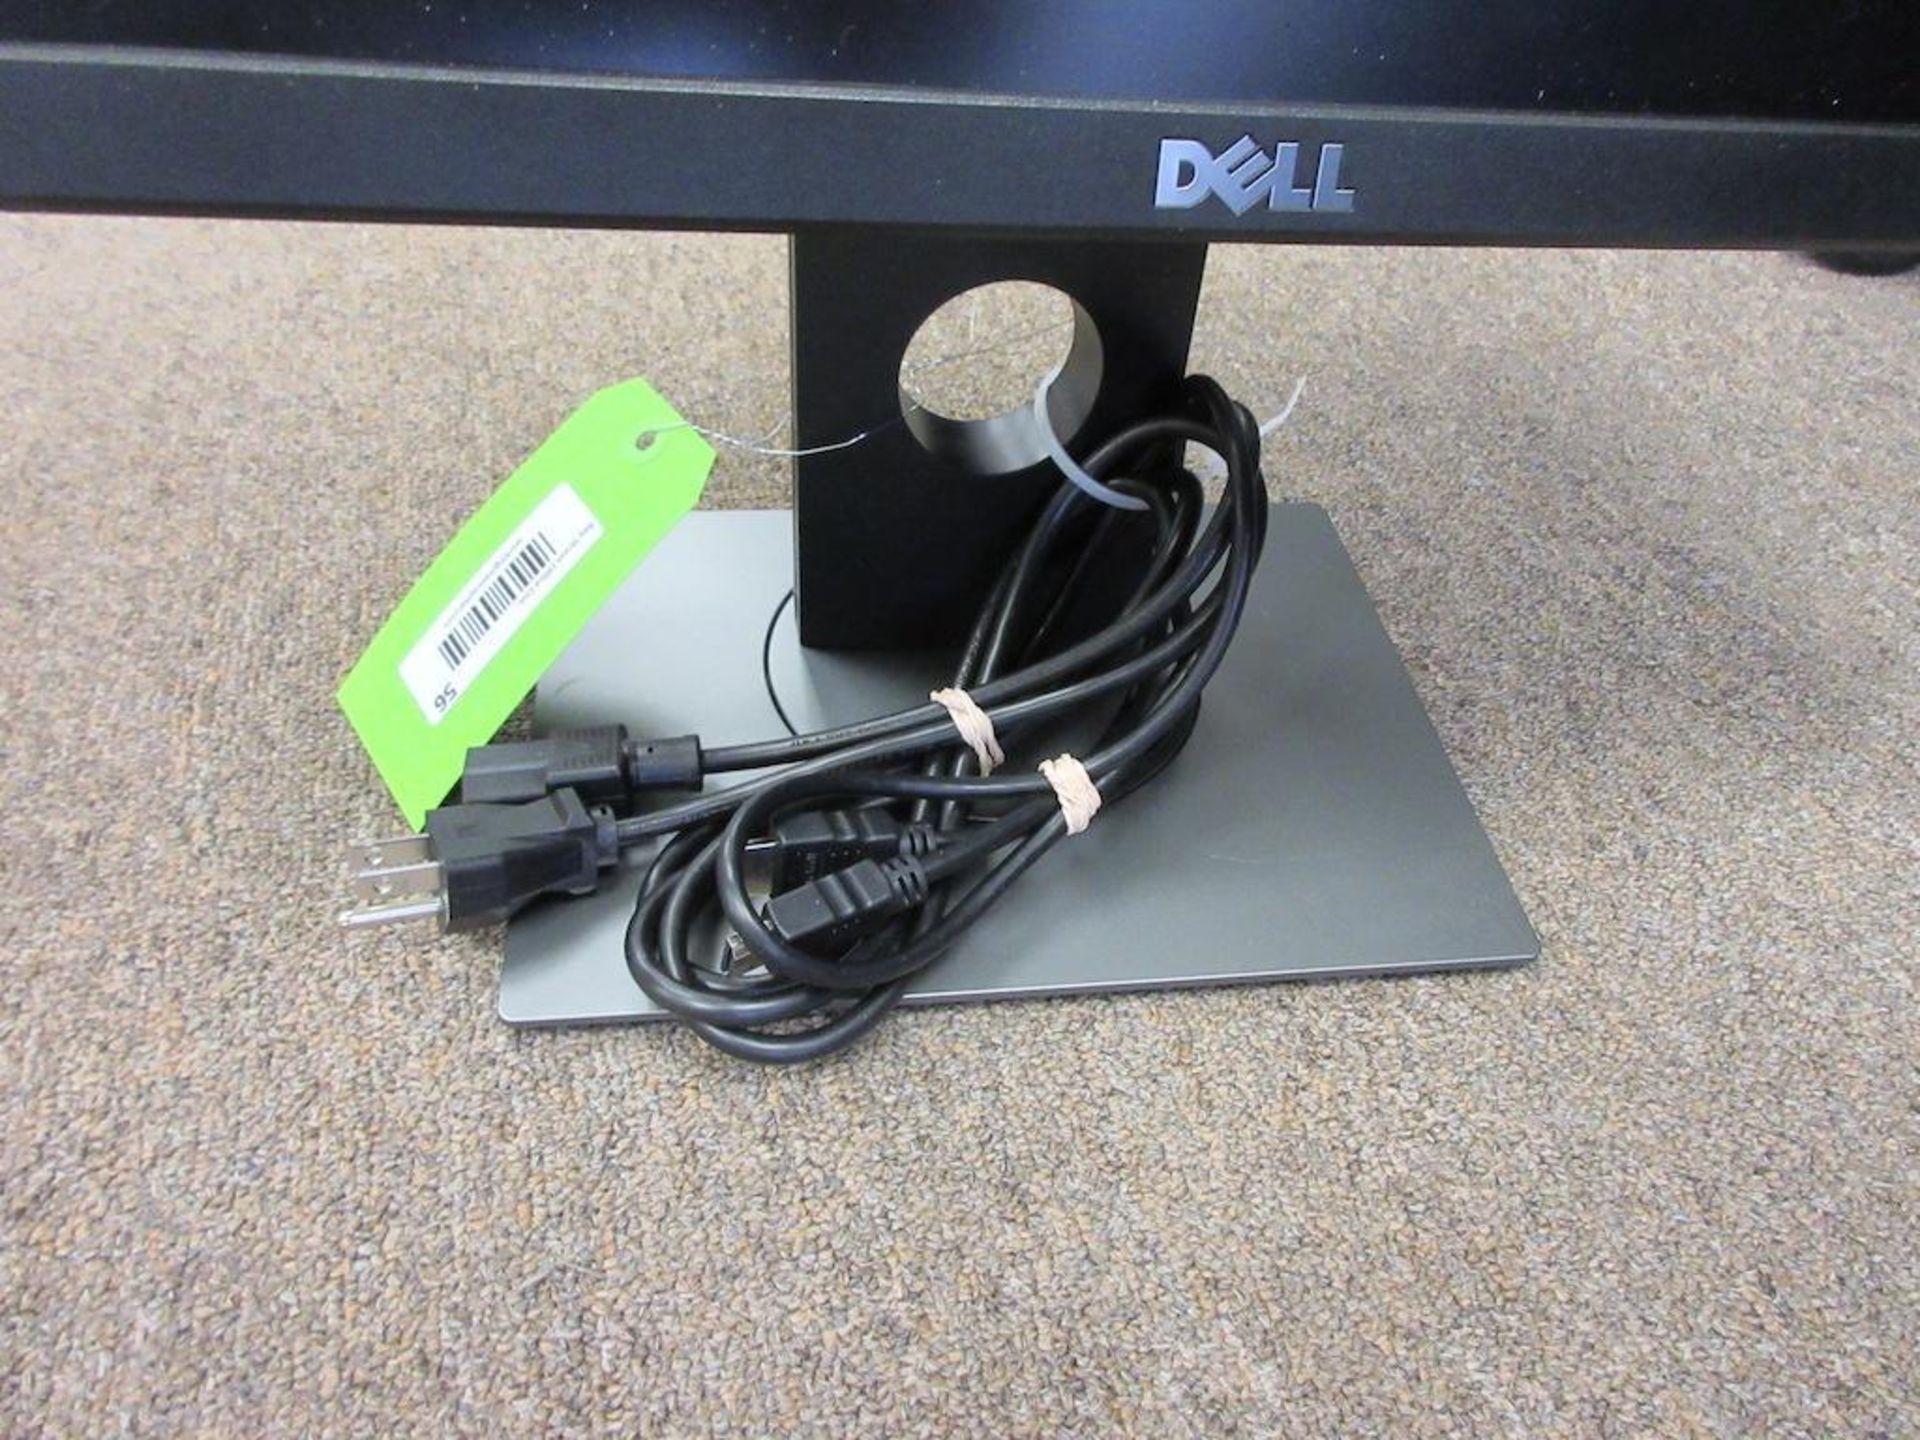 DELL MONITOR 24", MODEL P2417H, POWER CORD, HDMI CABLE - Image 2 of 2